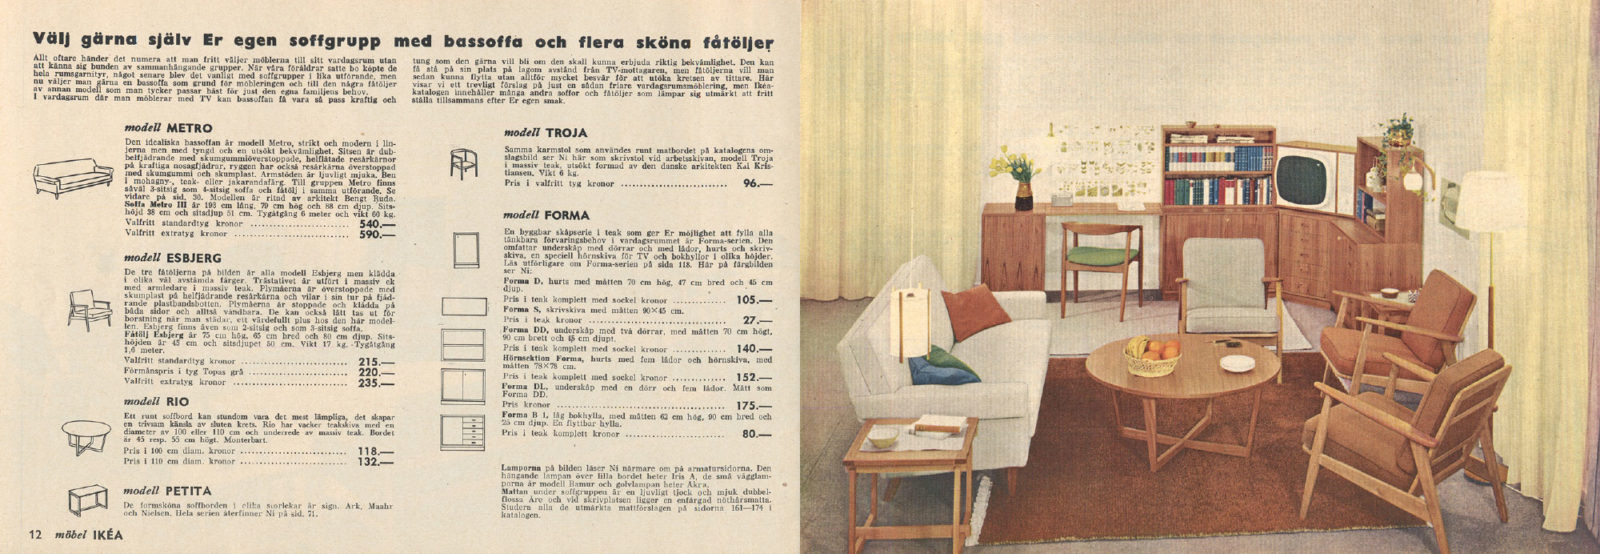 Spread in IKEA catalogue 1961 with furniture descriptions and a full-page image of bright living room with flowers and a TV.